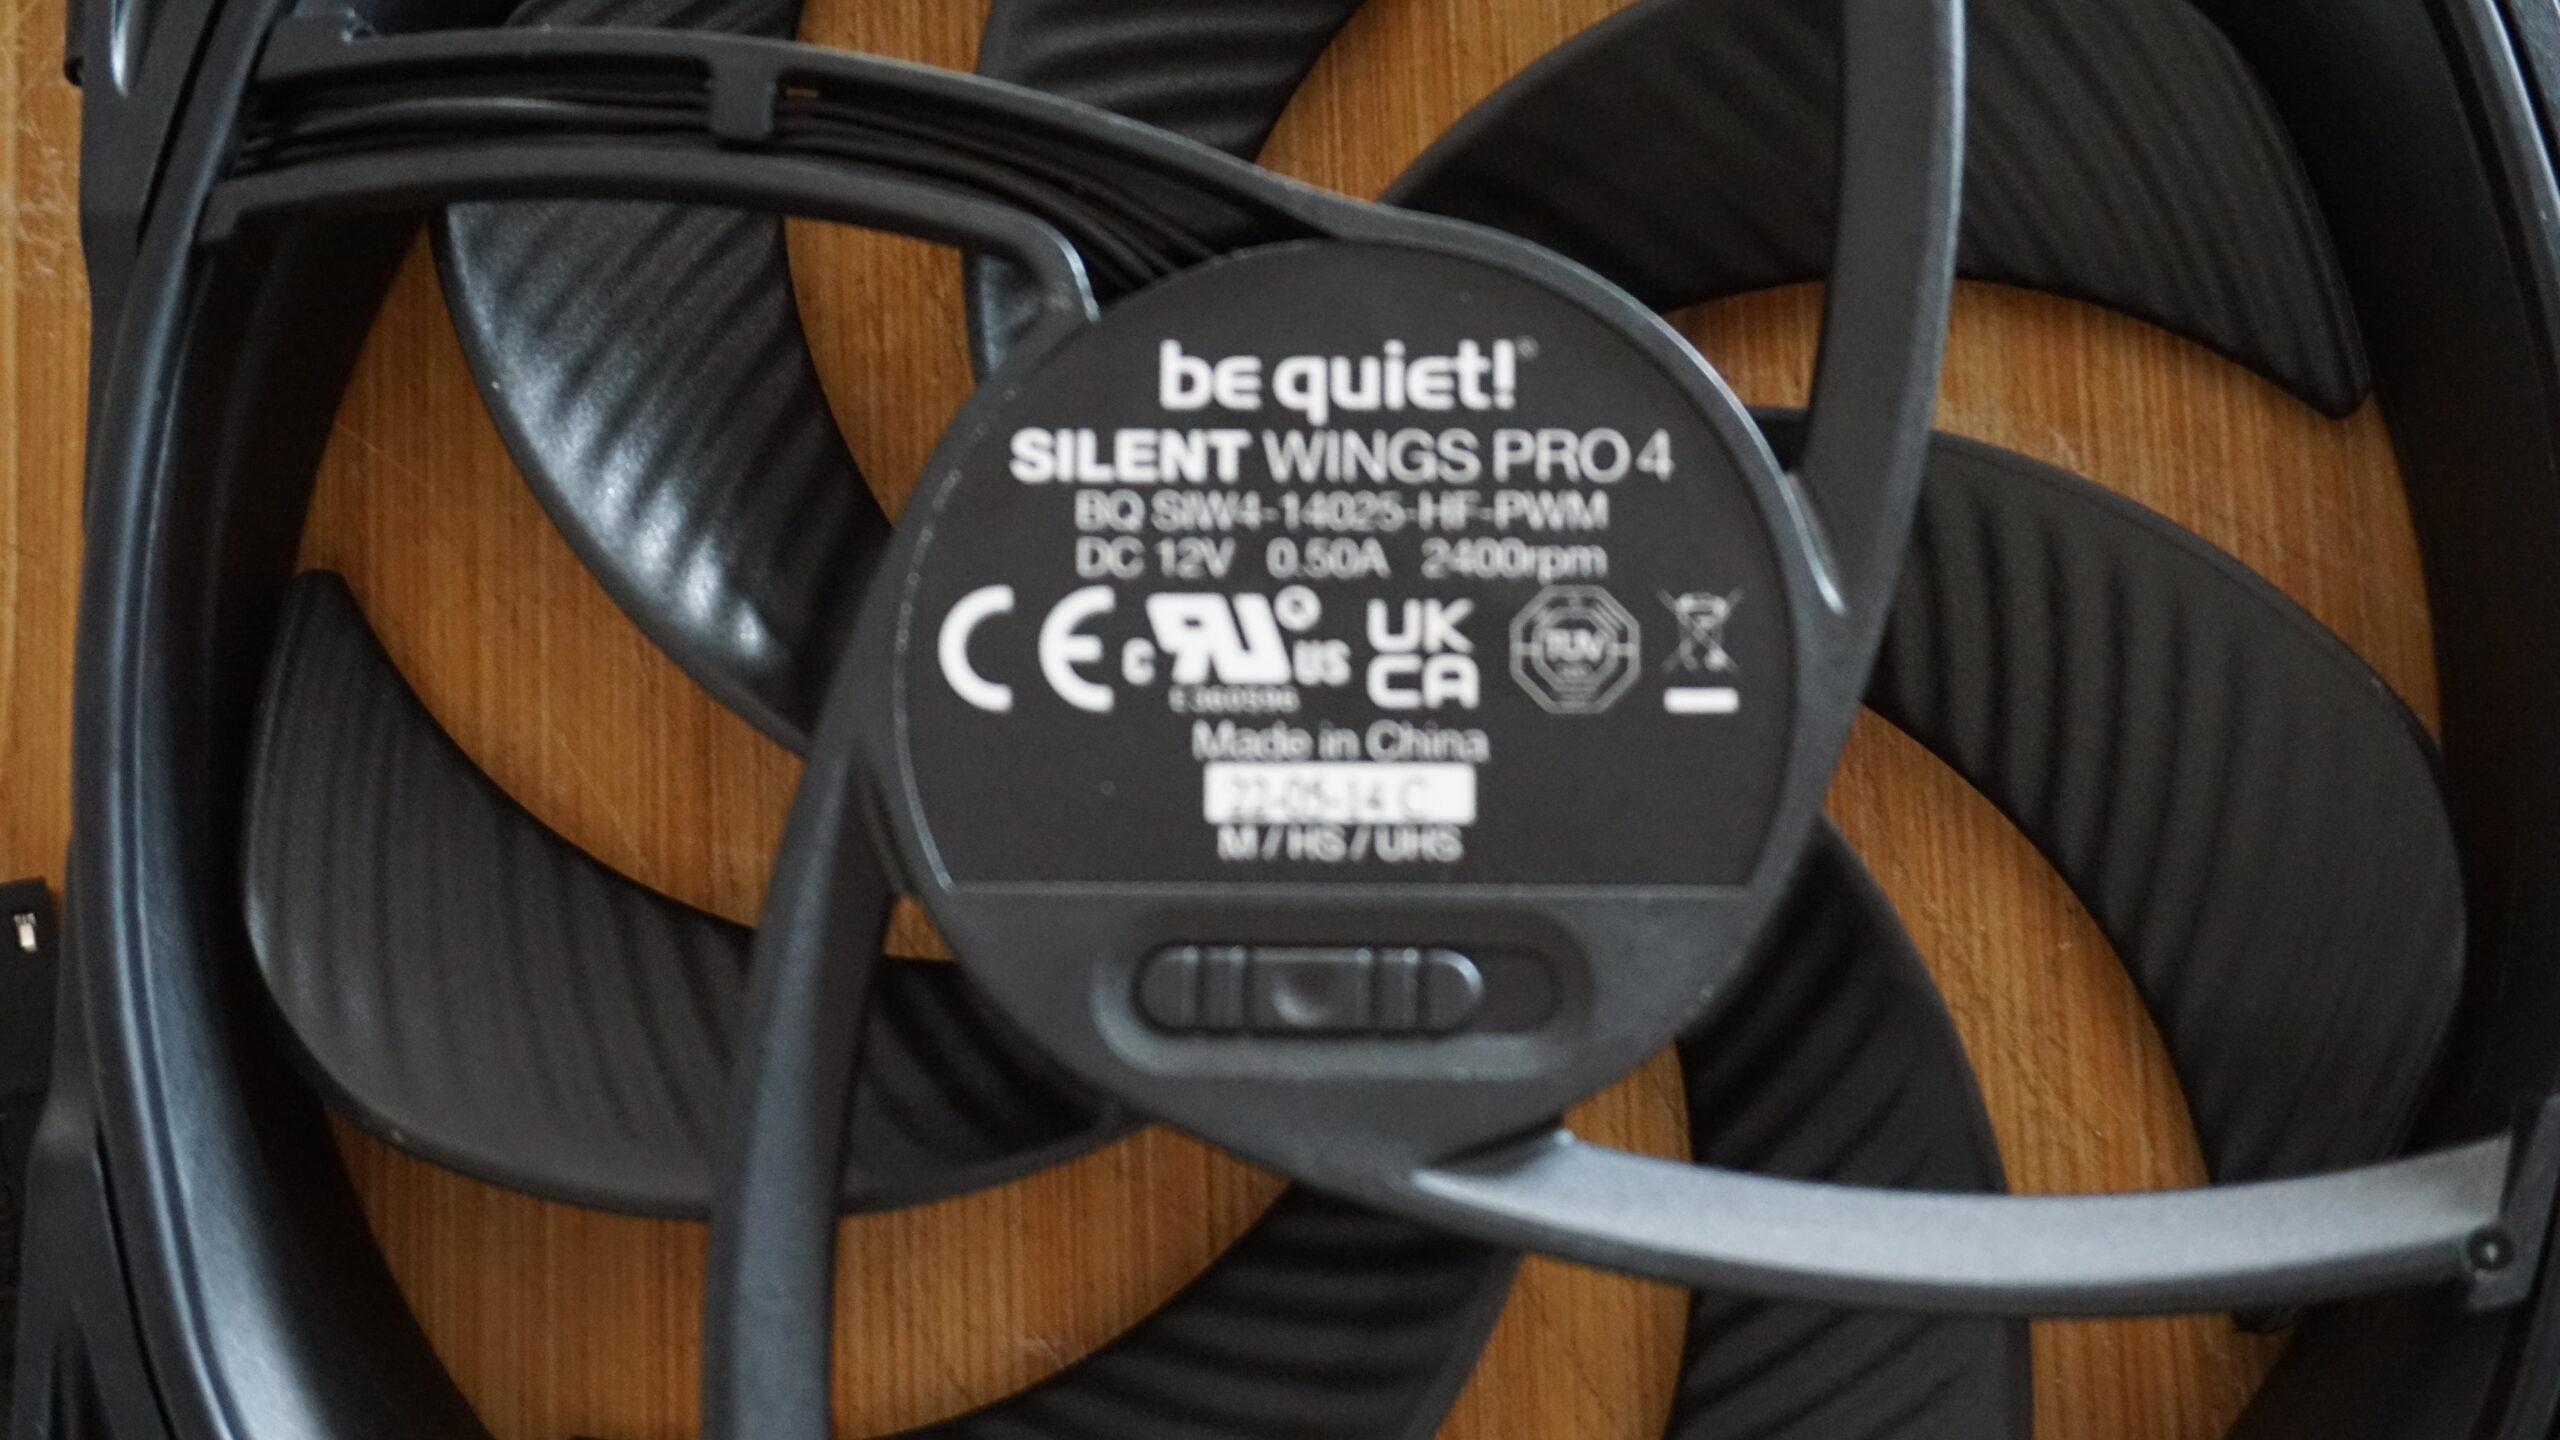 Review - 4 Wings ExtremeHW BeQuiet Pro Silent